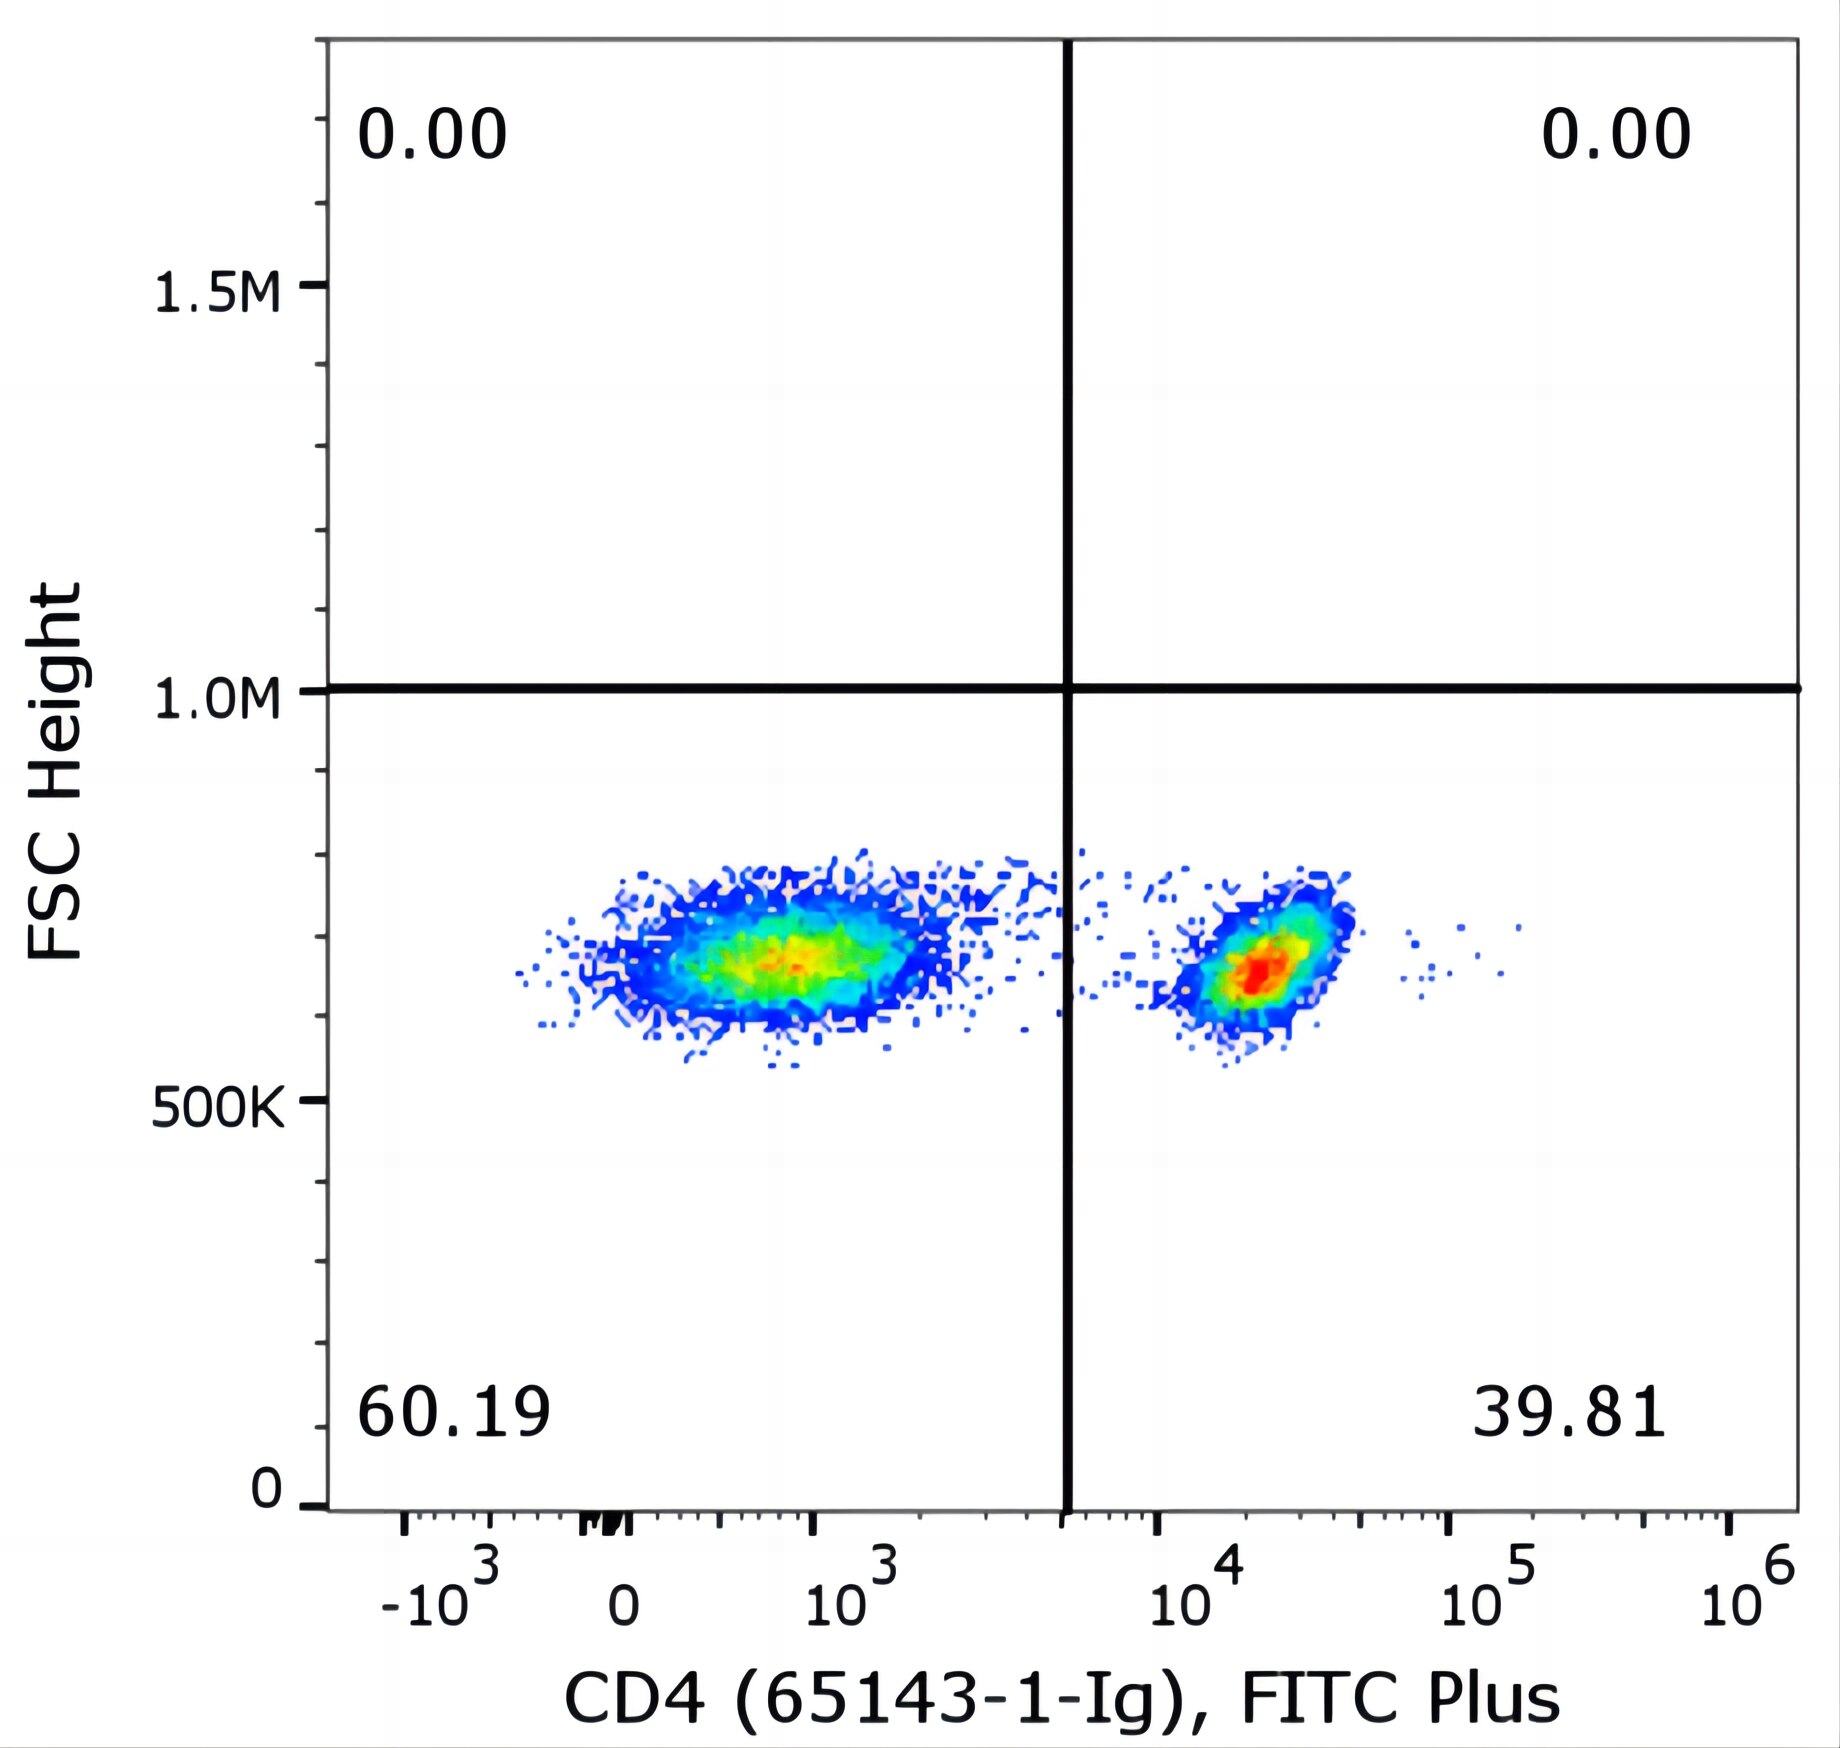 Flow cytometry of PBMC. 1X10^6 human peripheral blood mononuclear cells (PBMCs) were stained with anti-human CD4 antibody (clone RPA-T4, 65143-1-Ig) labeled with FlexAble FITC Plus Kit (KFA028).